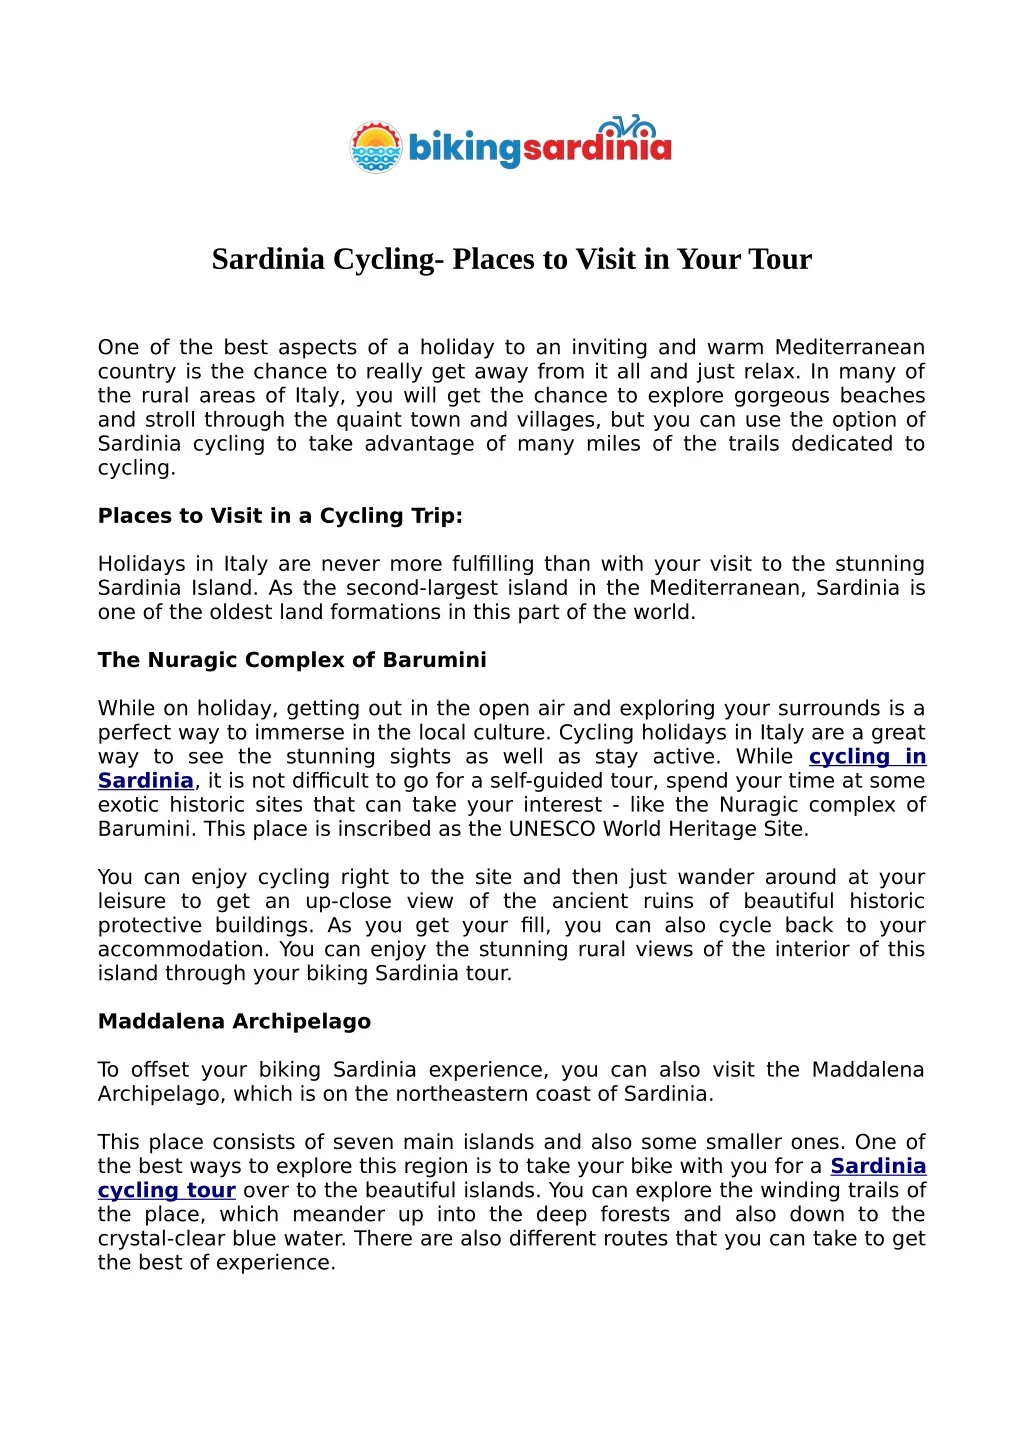 sardinia cycling places to visit in your tour